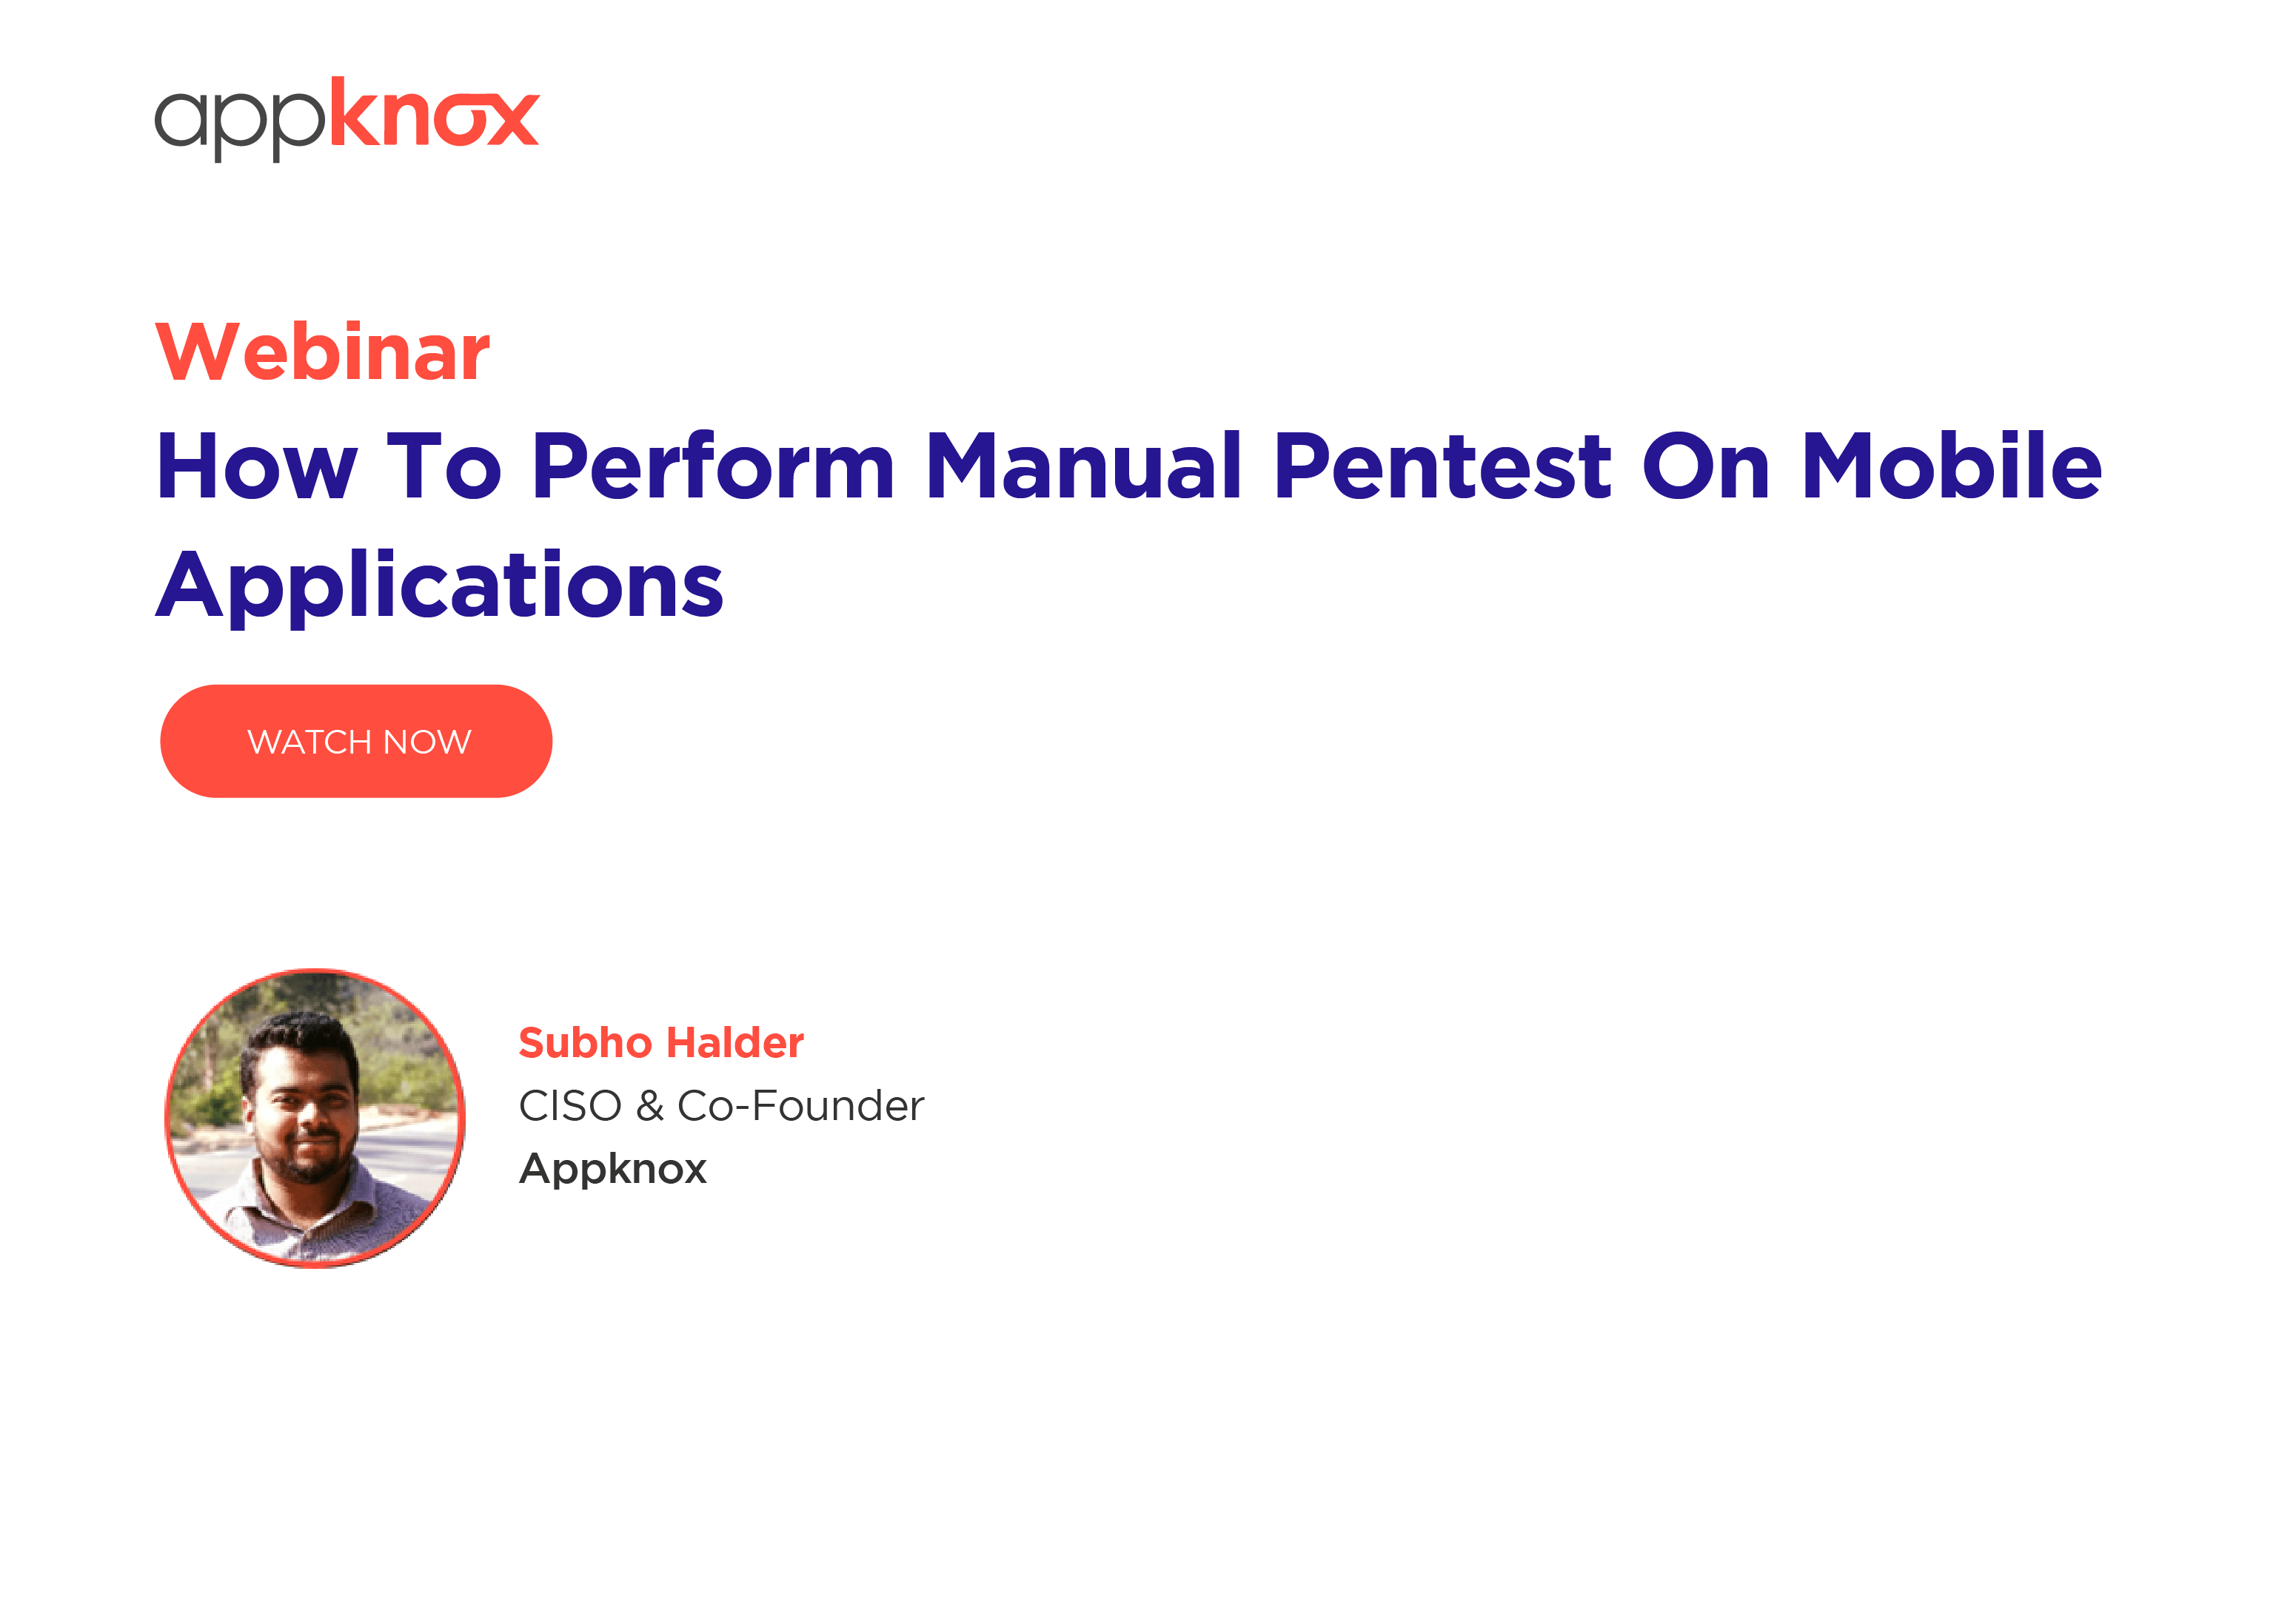 WEBINAR - How To Perform Manual Pentest On Mobile Applications